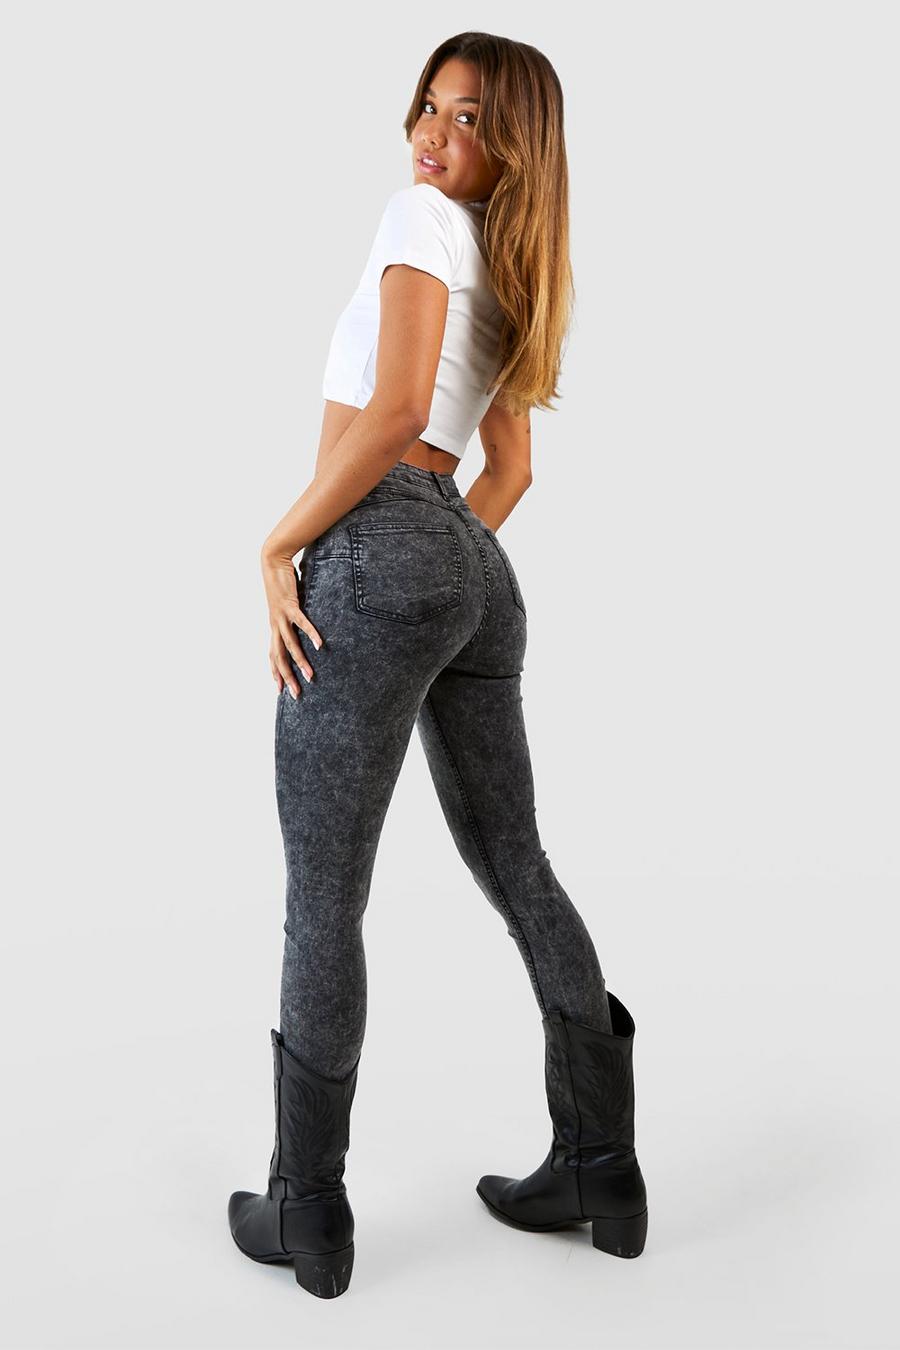 Butt Lifter Women Skinny Jeans High Rise Waist Push Up Authenthic